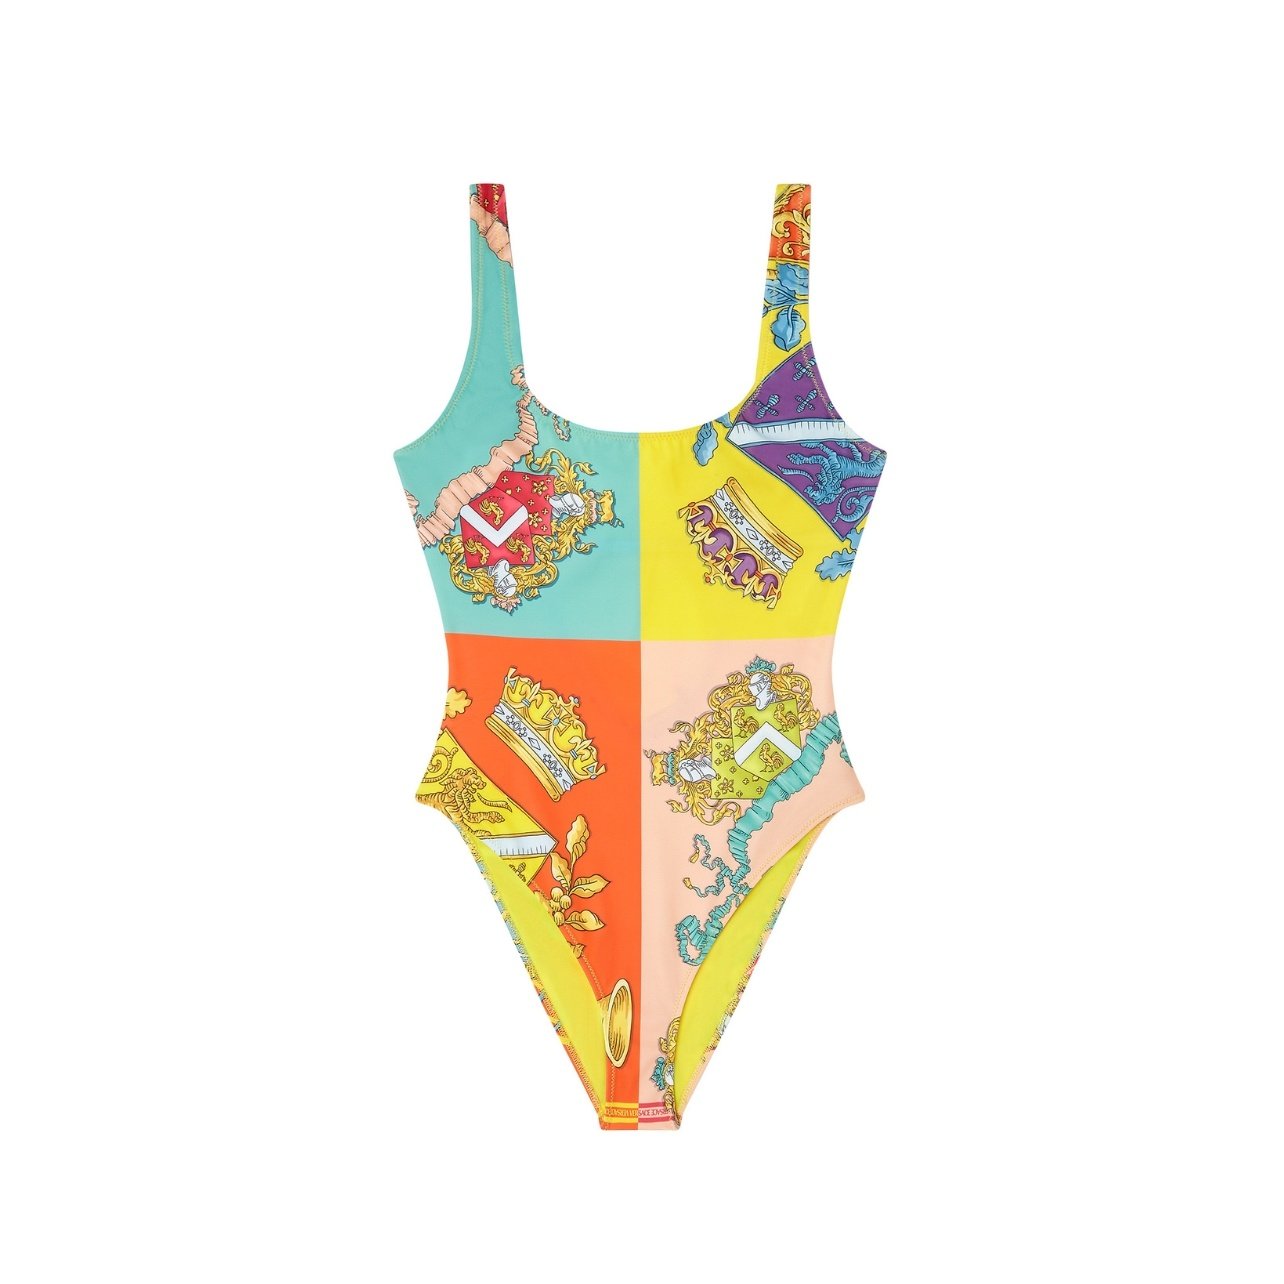 Multi-colored one-piece swimsuit with crown motif